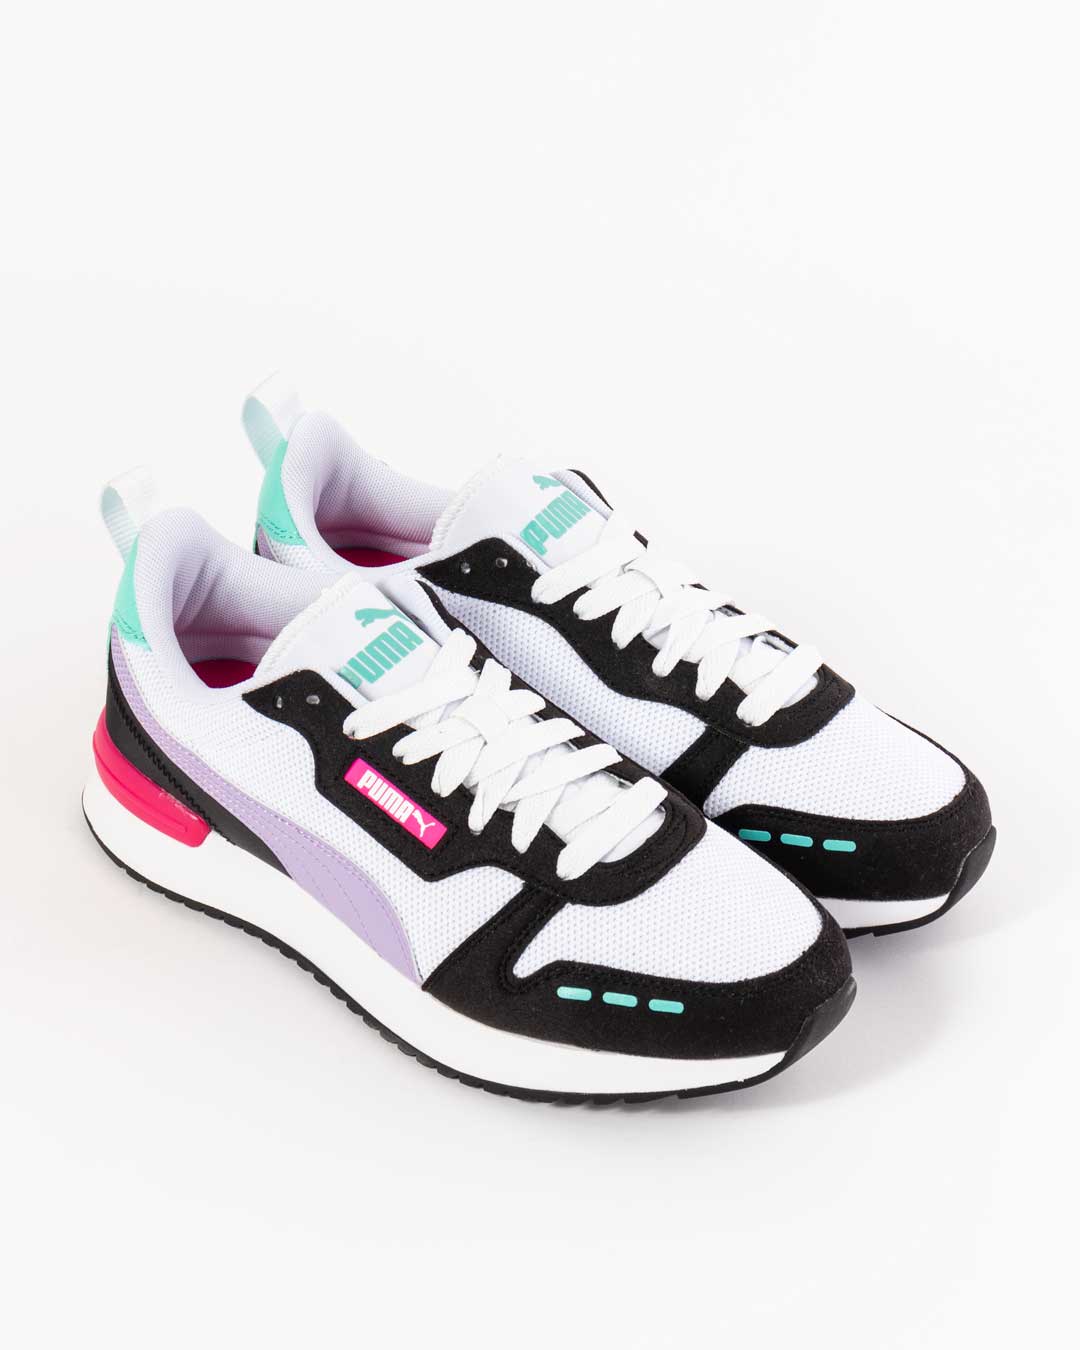 woman's puma sneaker colour blocked paneling in white, green, mint, purple and black with Puma logo underneath eye stay in pink with striped paneling on vamp in mint green